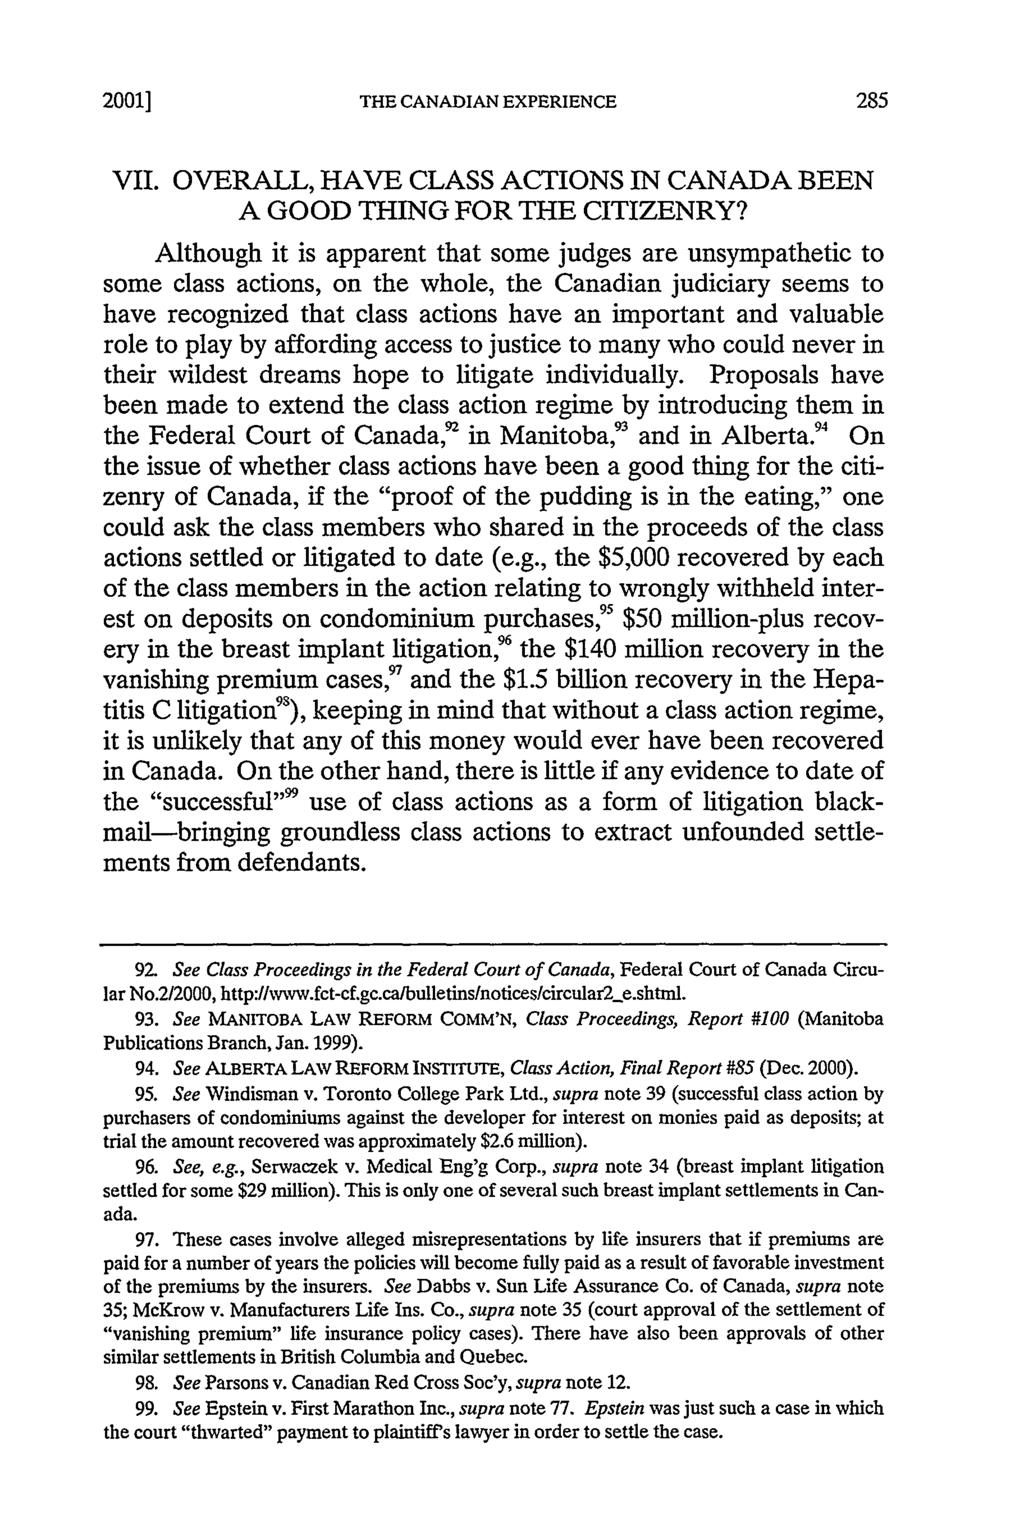 2001] THE CANADIAN EXPERIENCE VII. OVERALL, HAVE CLASS ACTIONS IN CANADA BEEN A GOOD THING FOR THE CITIZENRY?